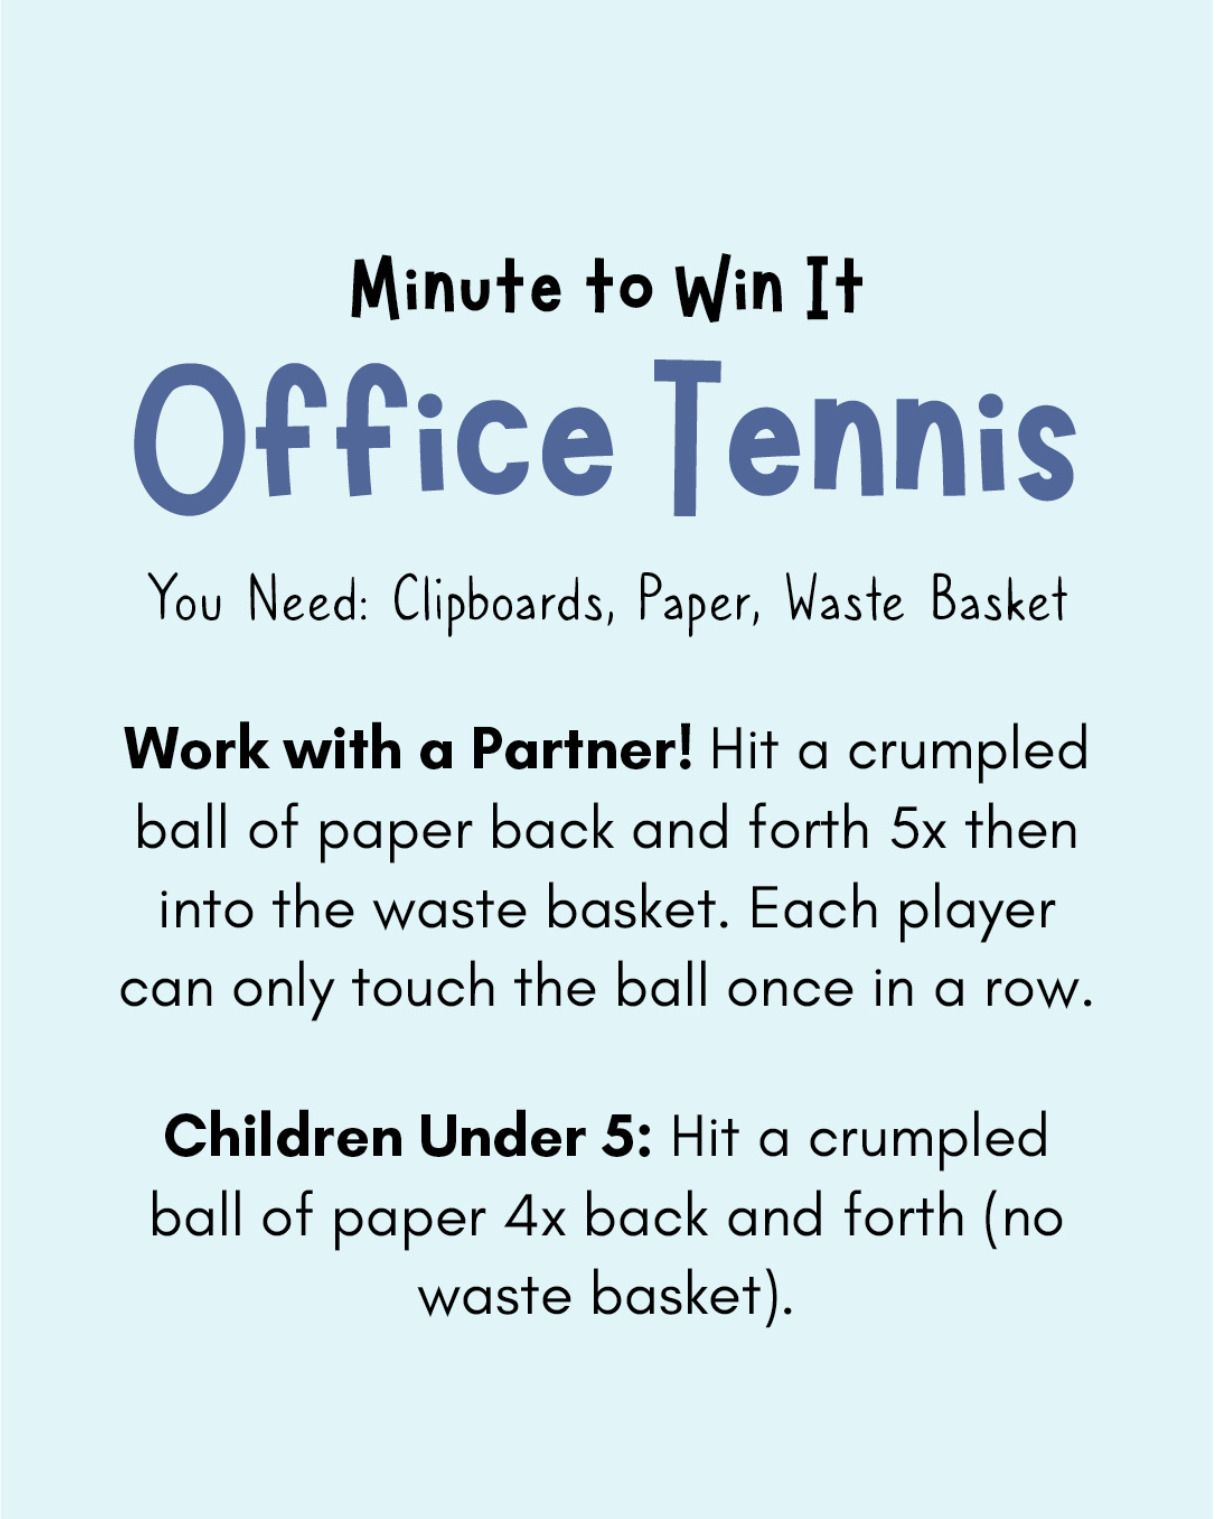 Minute to Win It Games for Families: Office Tennis